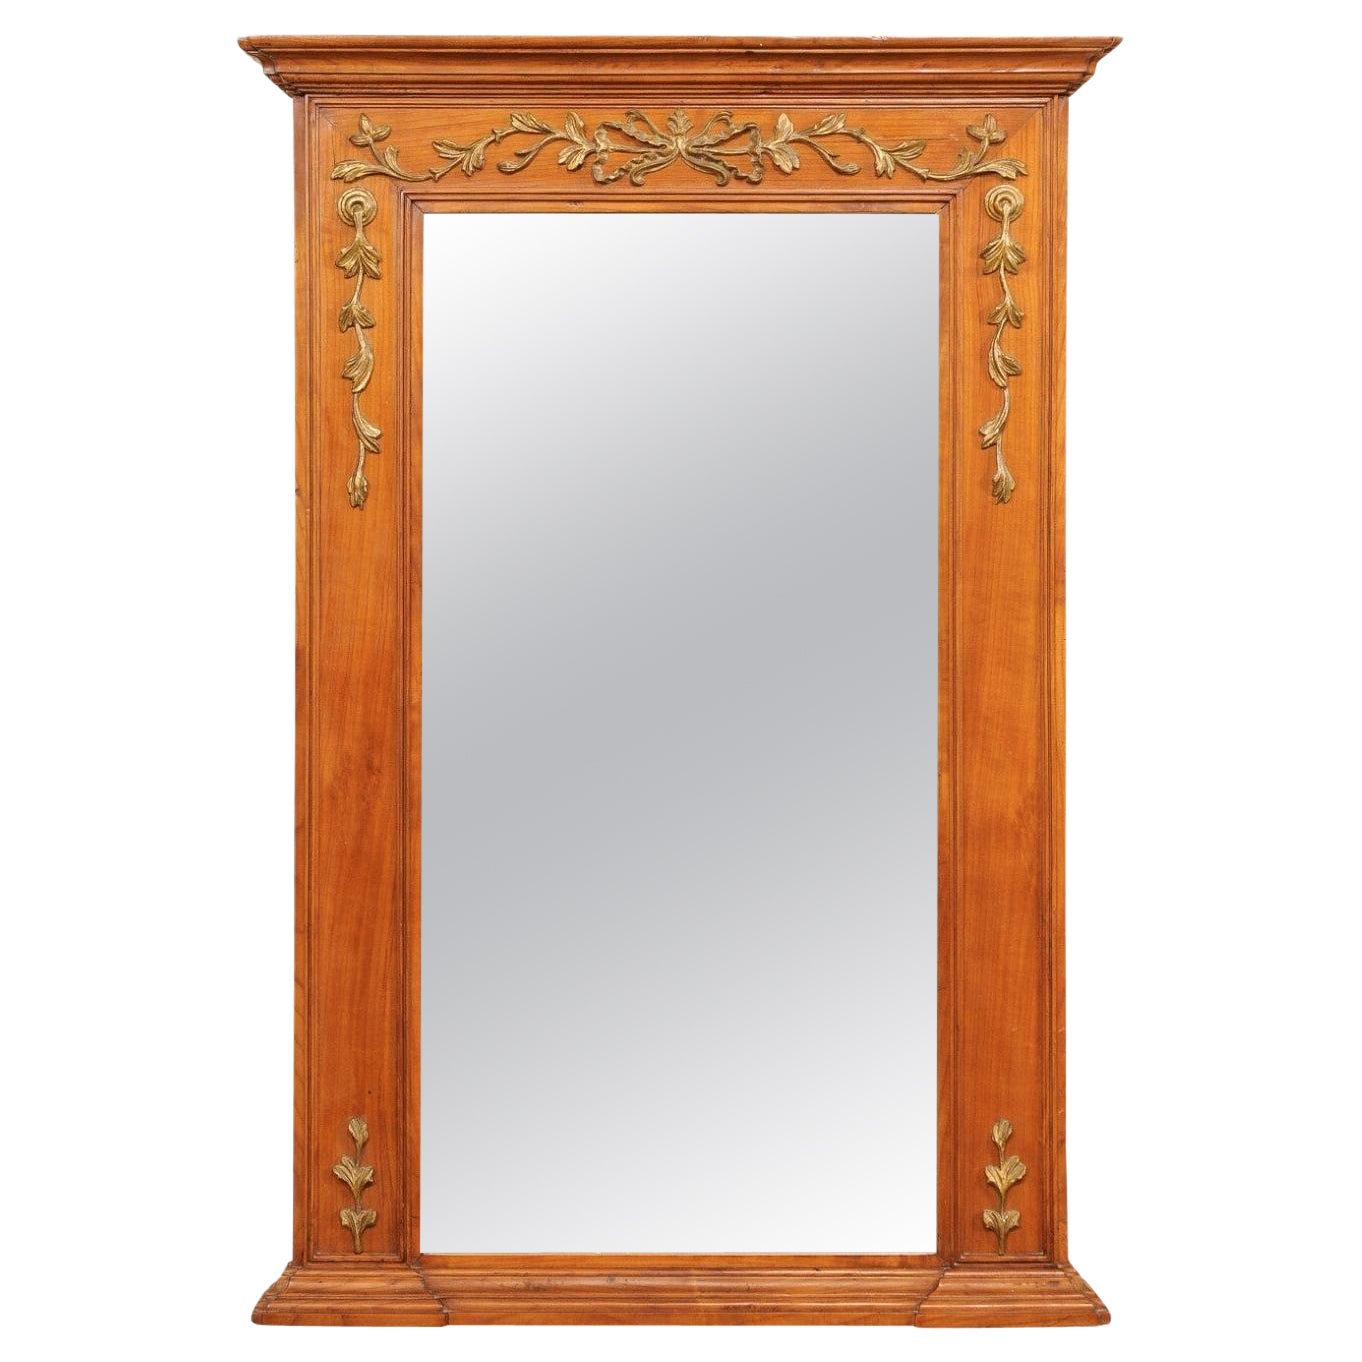 French Antique 4ft Tall Wooden Mirror w/Neoclassic Bow-Tie & Garland Accents For Sale